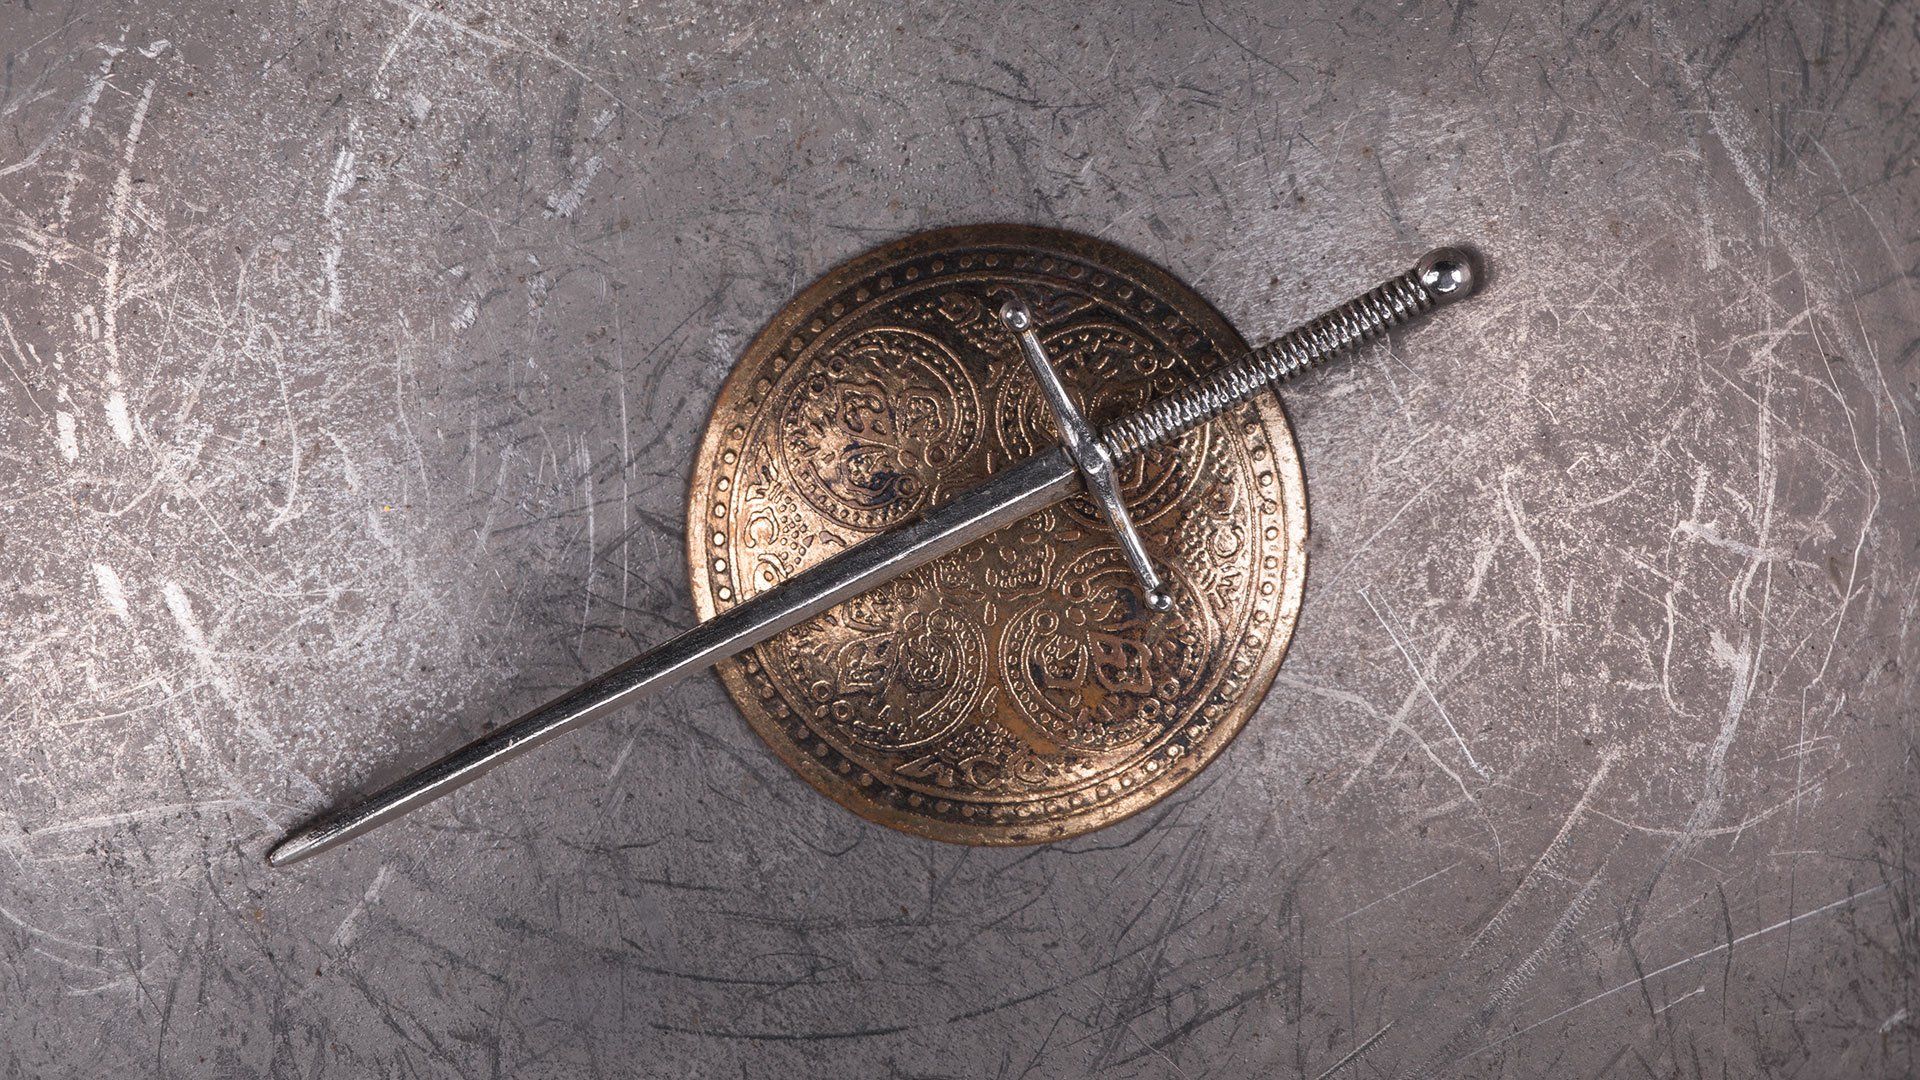 Photograph of a sword and shield